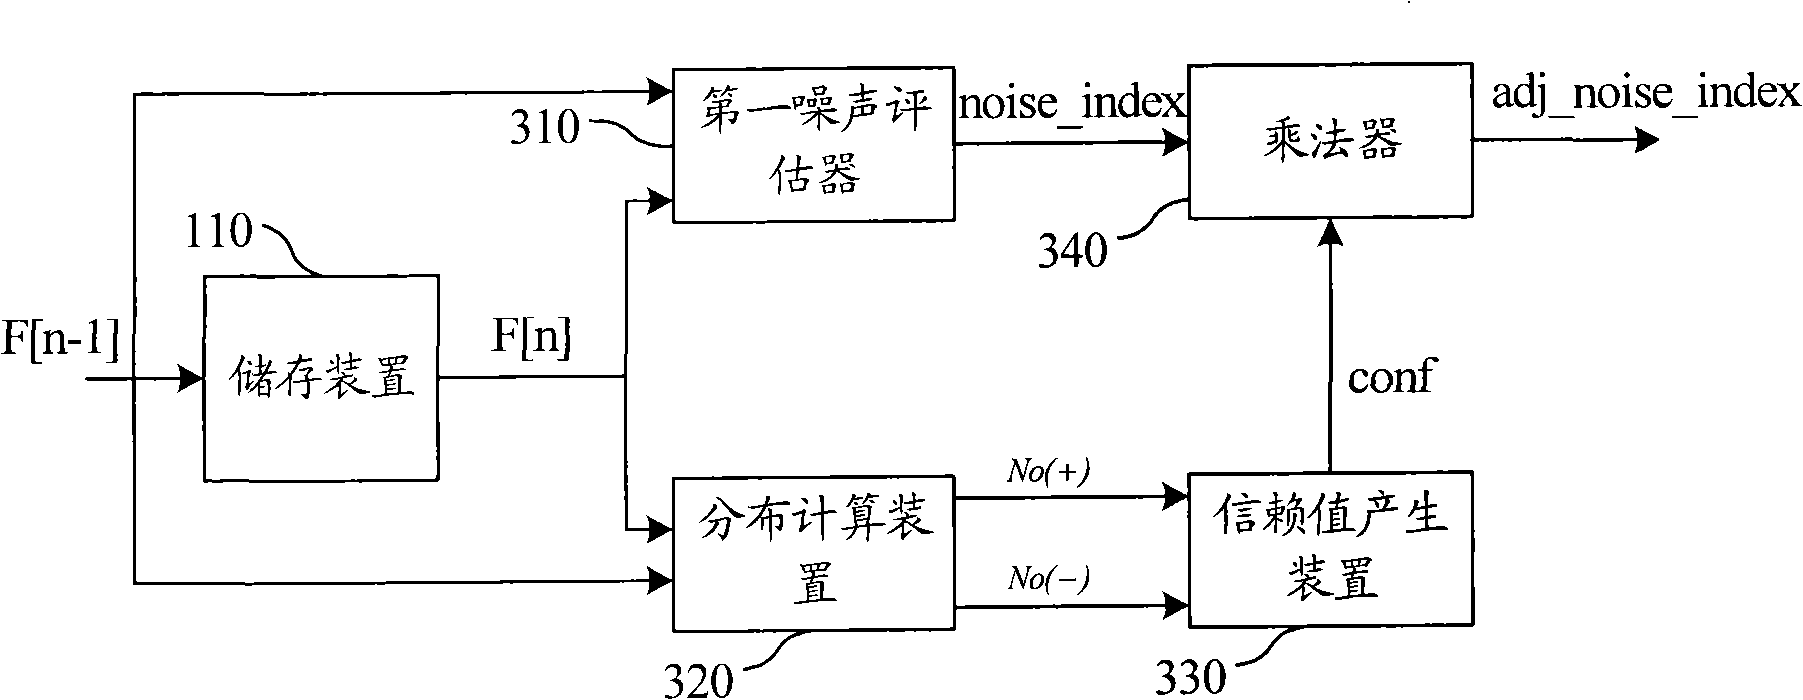 Video noise evaluation system and method